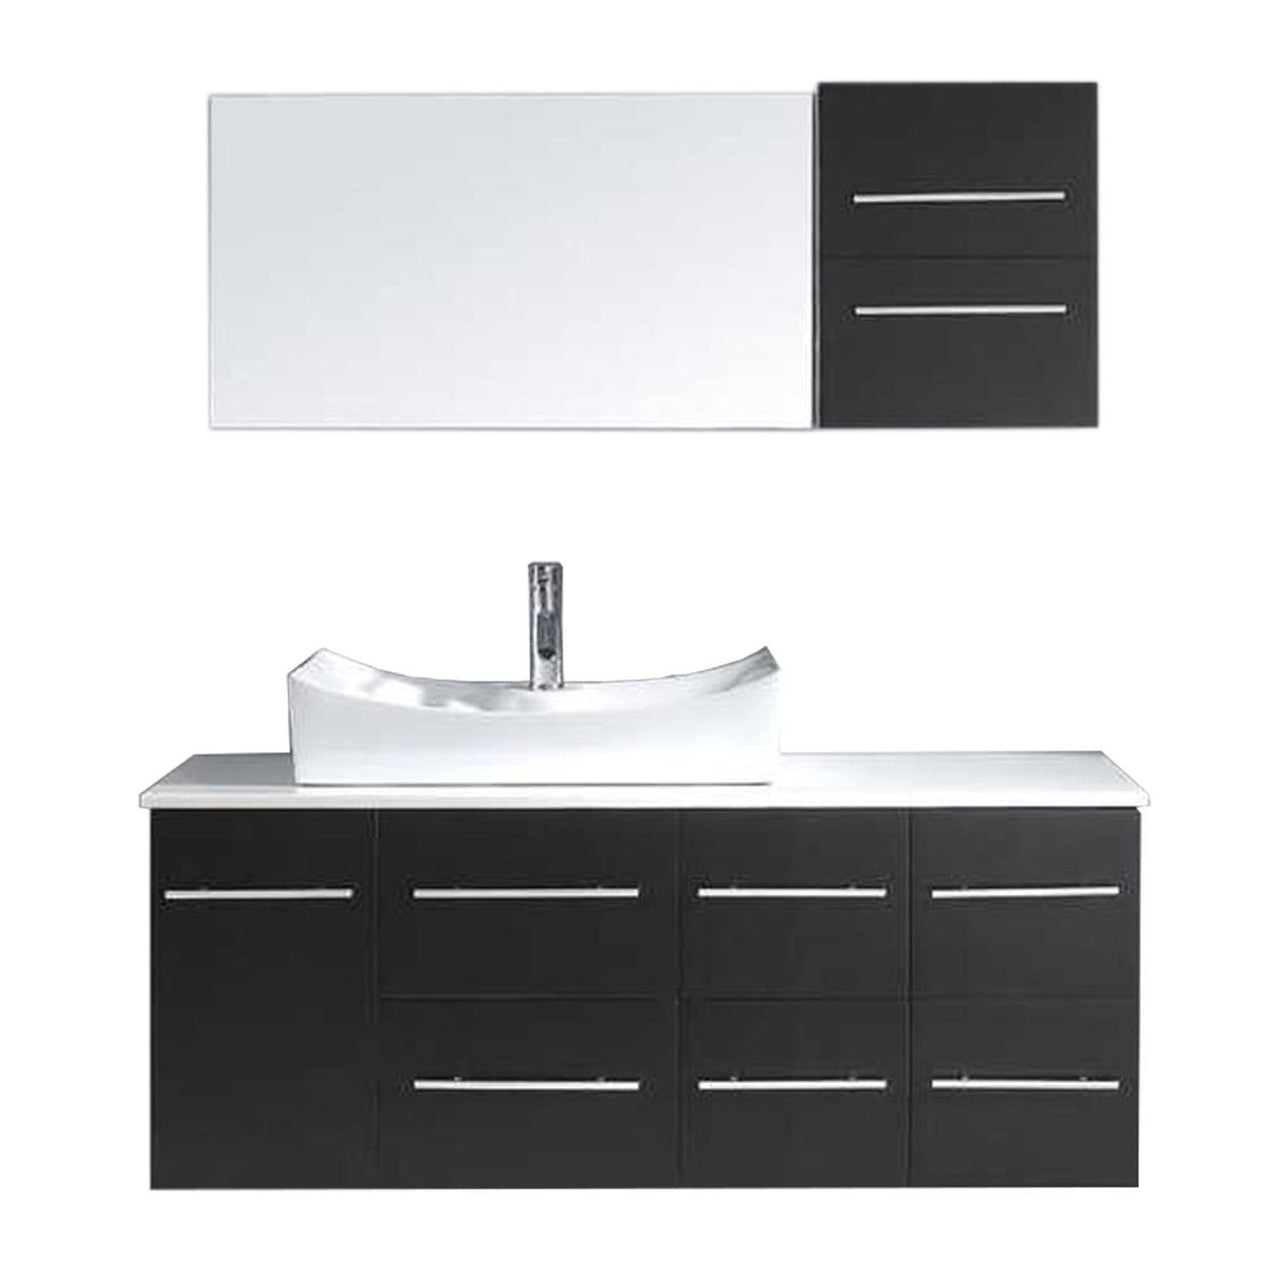 Virtu USA Ceanna 55" Single Square Sink Espresso Top Vanity in Espresso with Polished Chrome Faucet and Mirror Vanity Virtu USA 